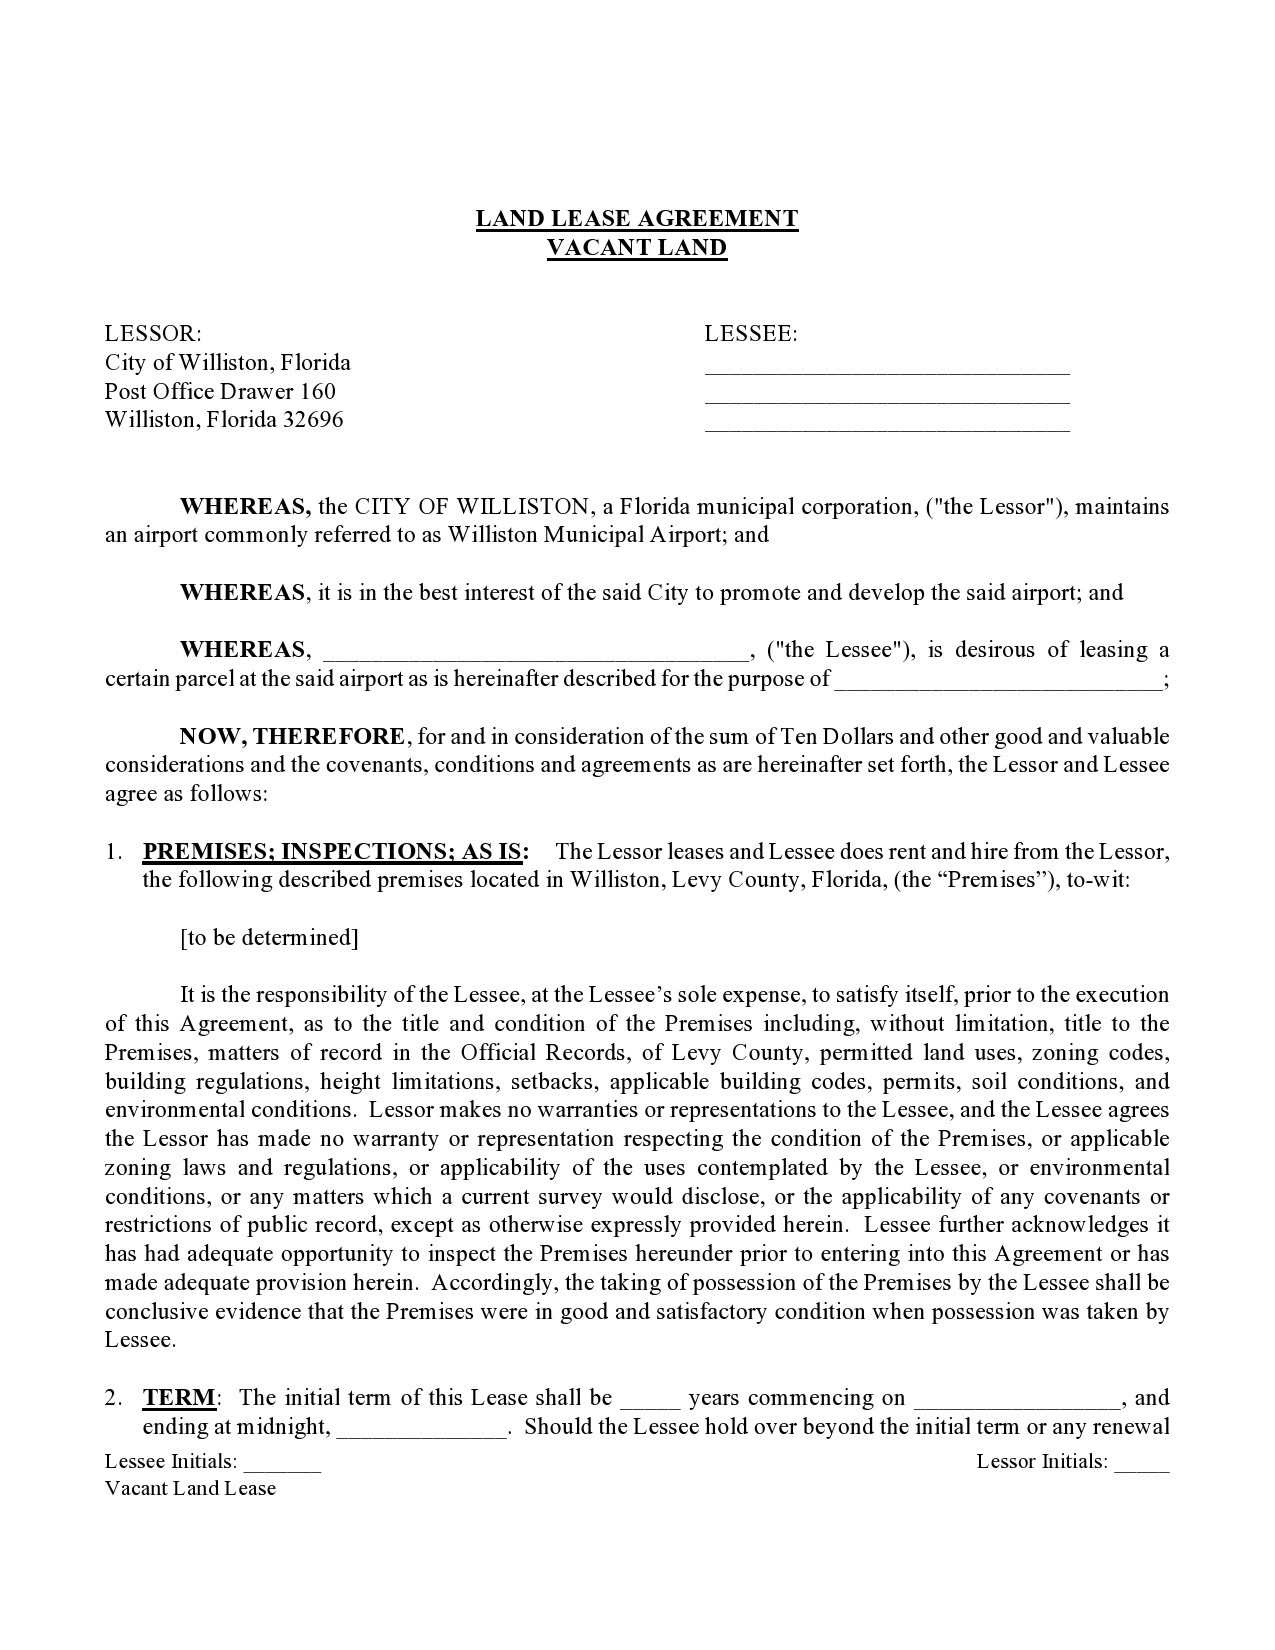 Free land lease agreement 35